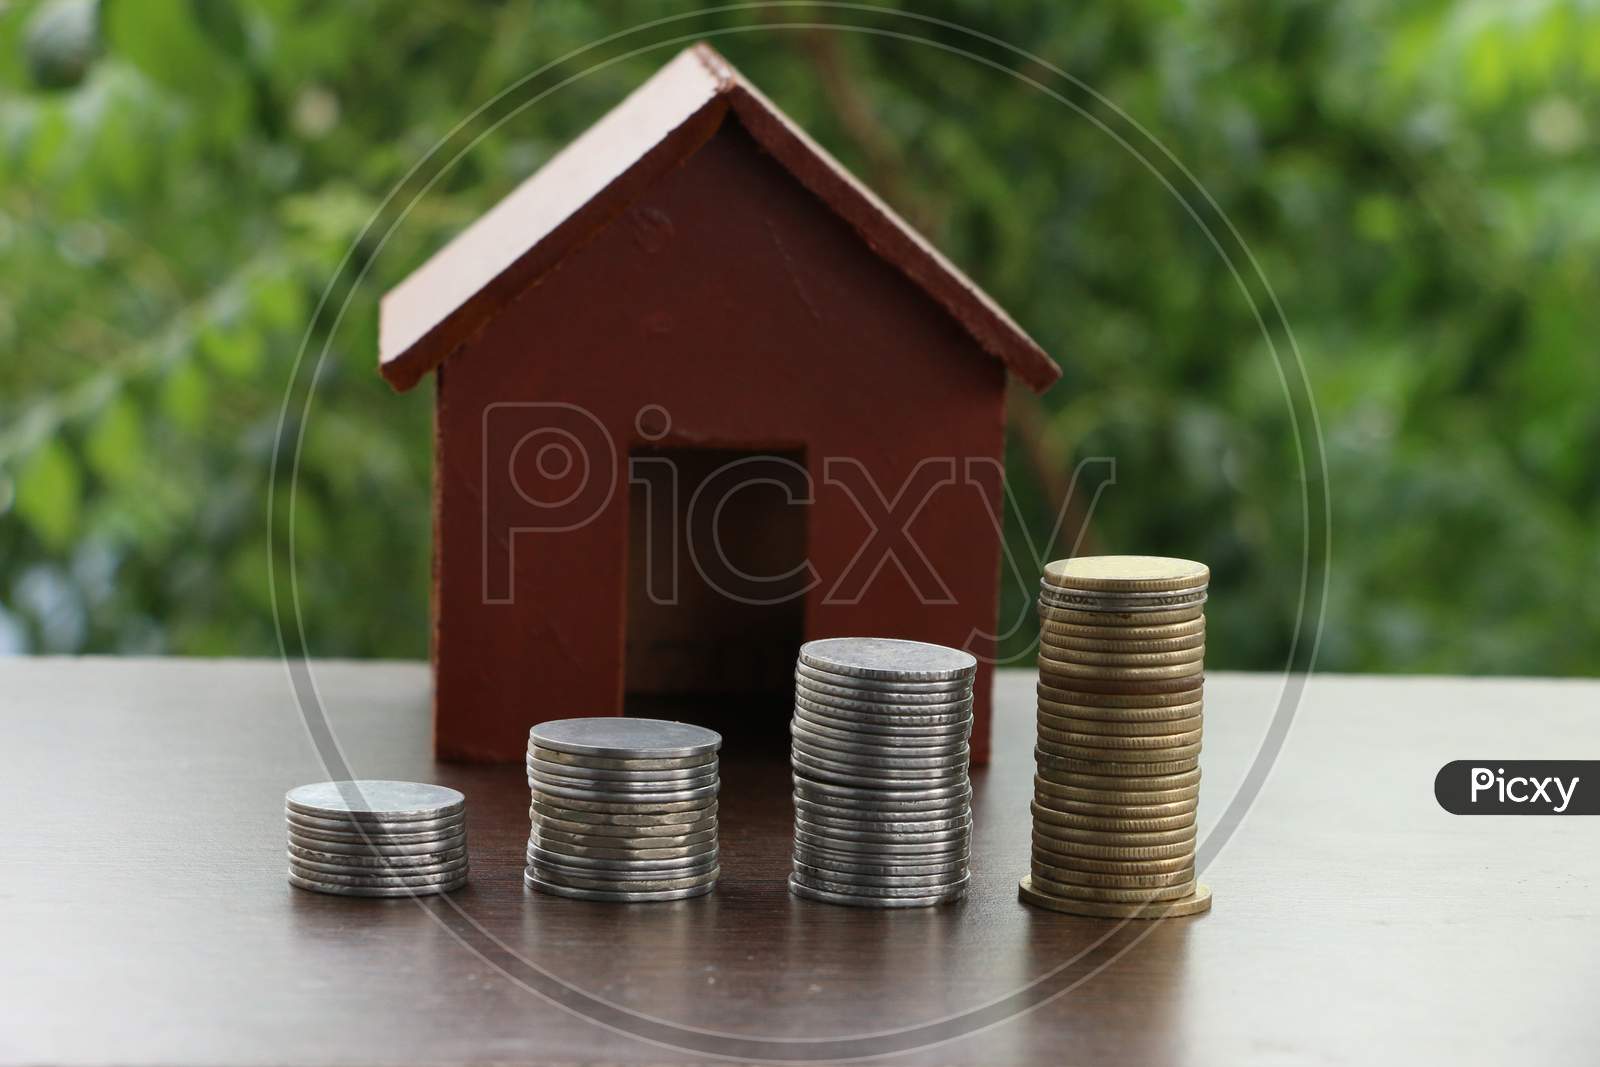 Money Coin Stack Growing Graph With Home Model On Wood Table In The Public Park Background. Saving Money And Investment Concept.